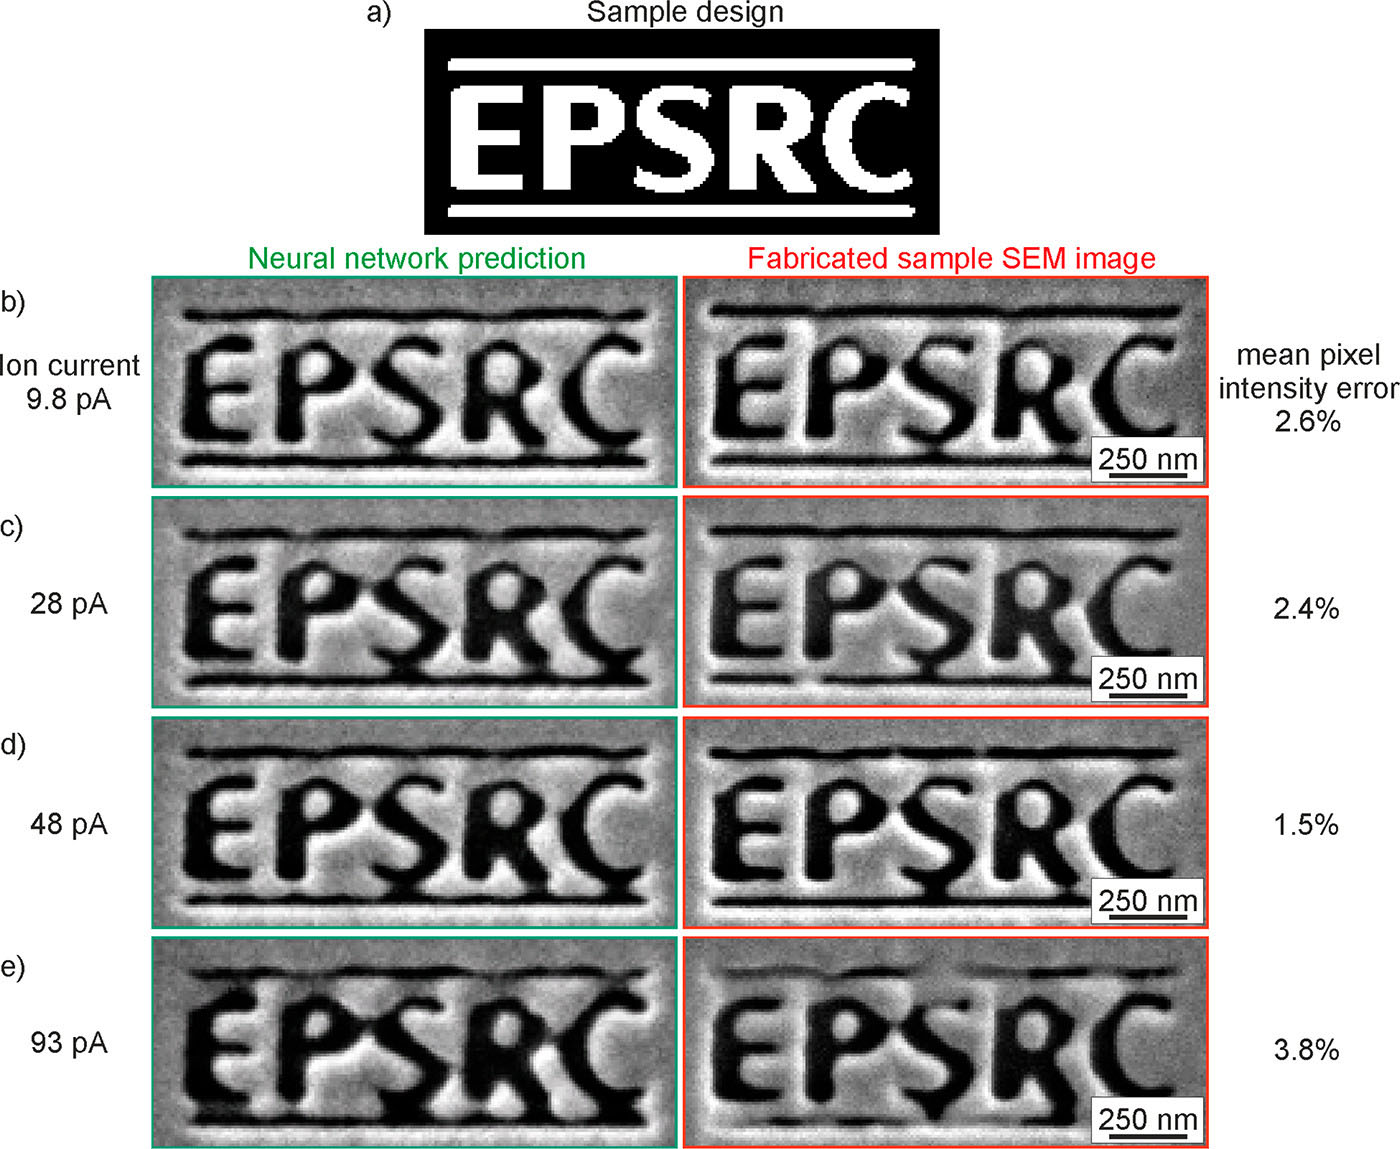 Comparison between neural network-predicted (left column) and actual FIB-milled sample SEM images (right column) for the EPSRC logo